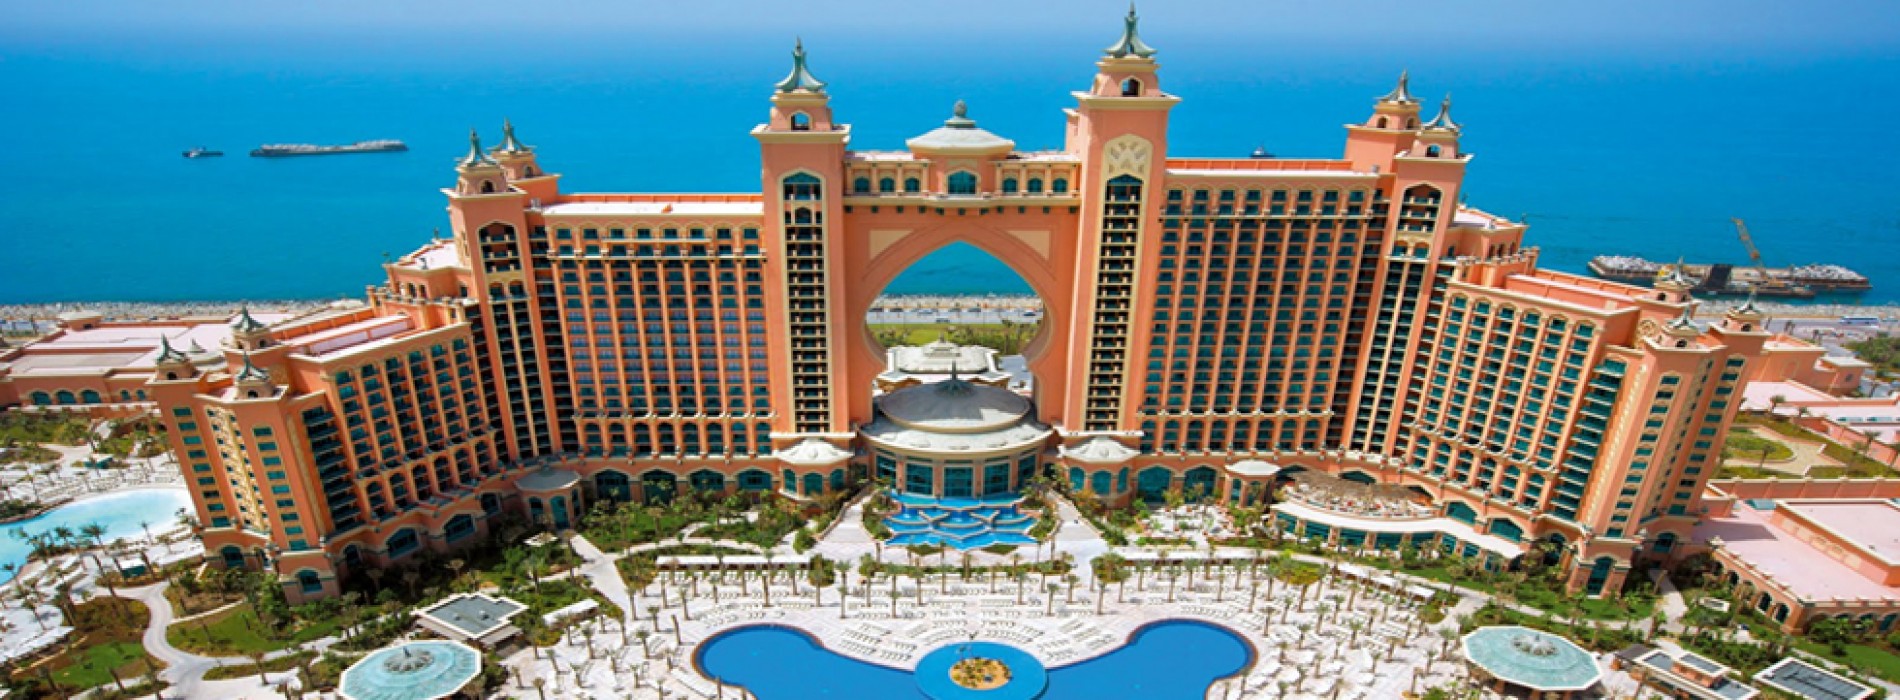 Atlantis, The Palm takes the title as the Most Instagrammed Hotel in Dubai and the Middle East